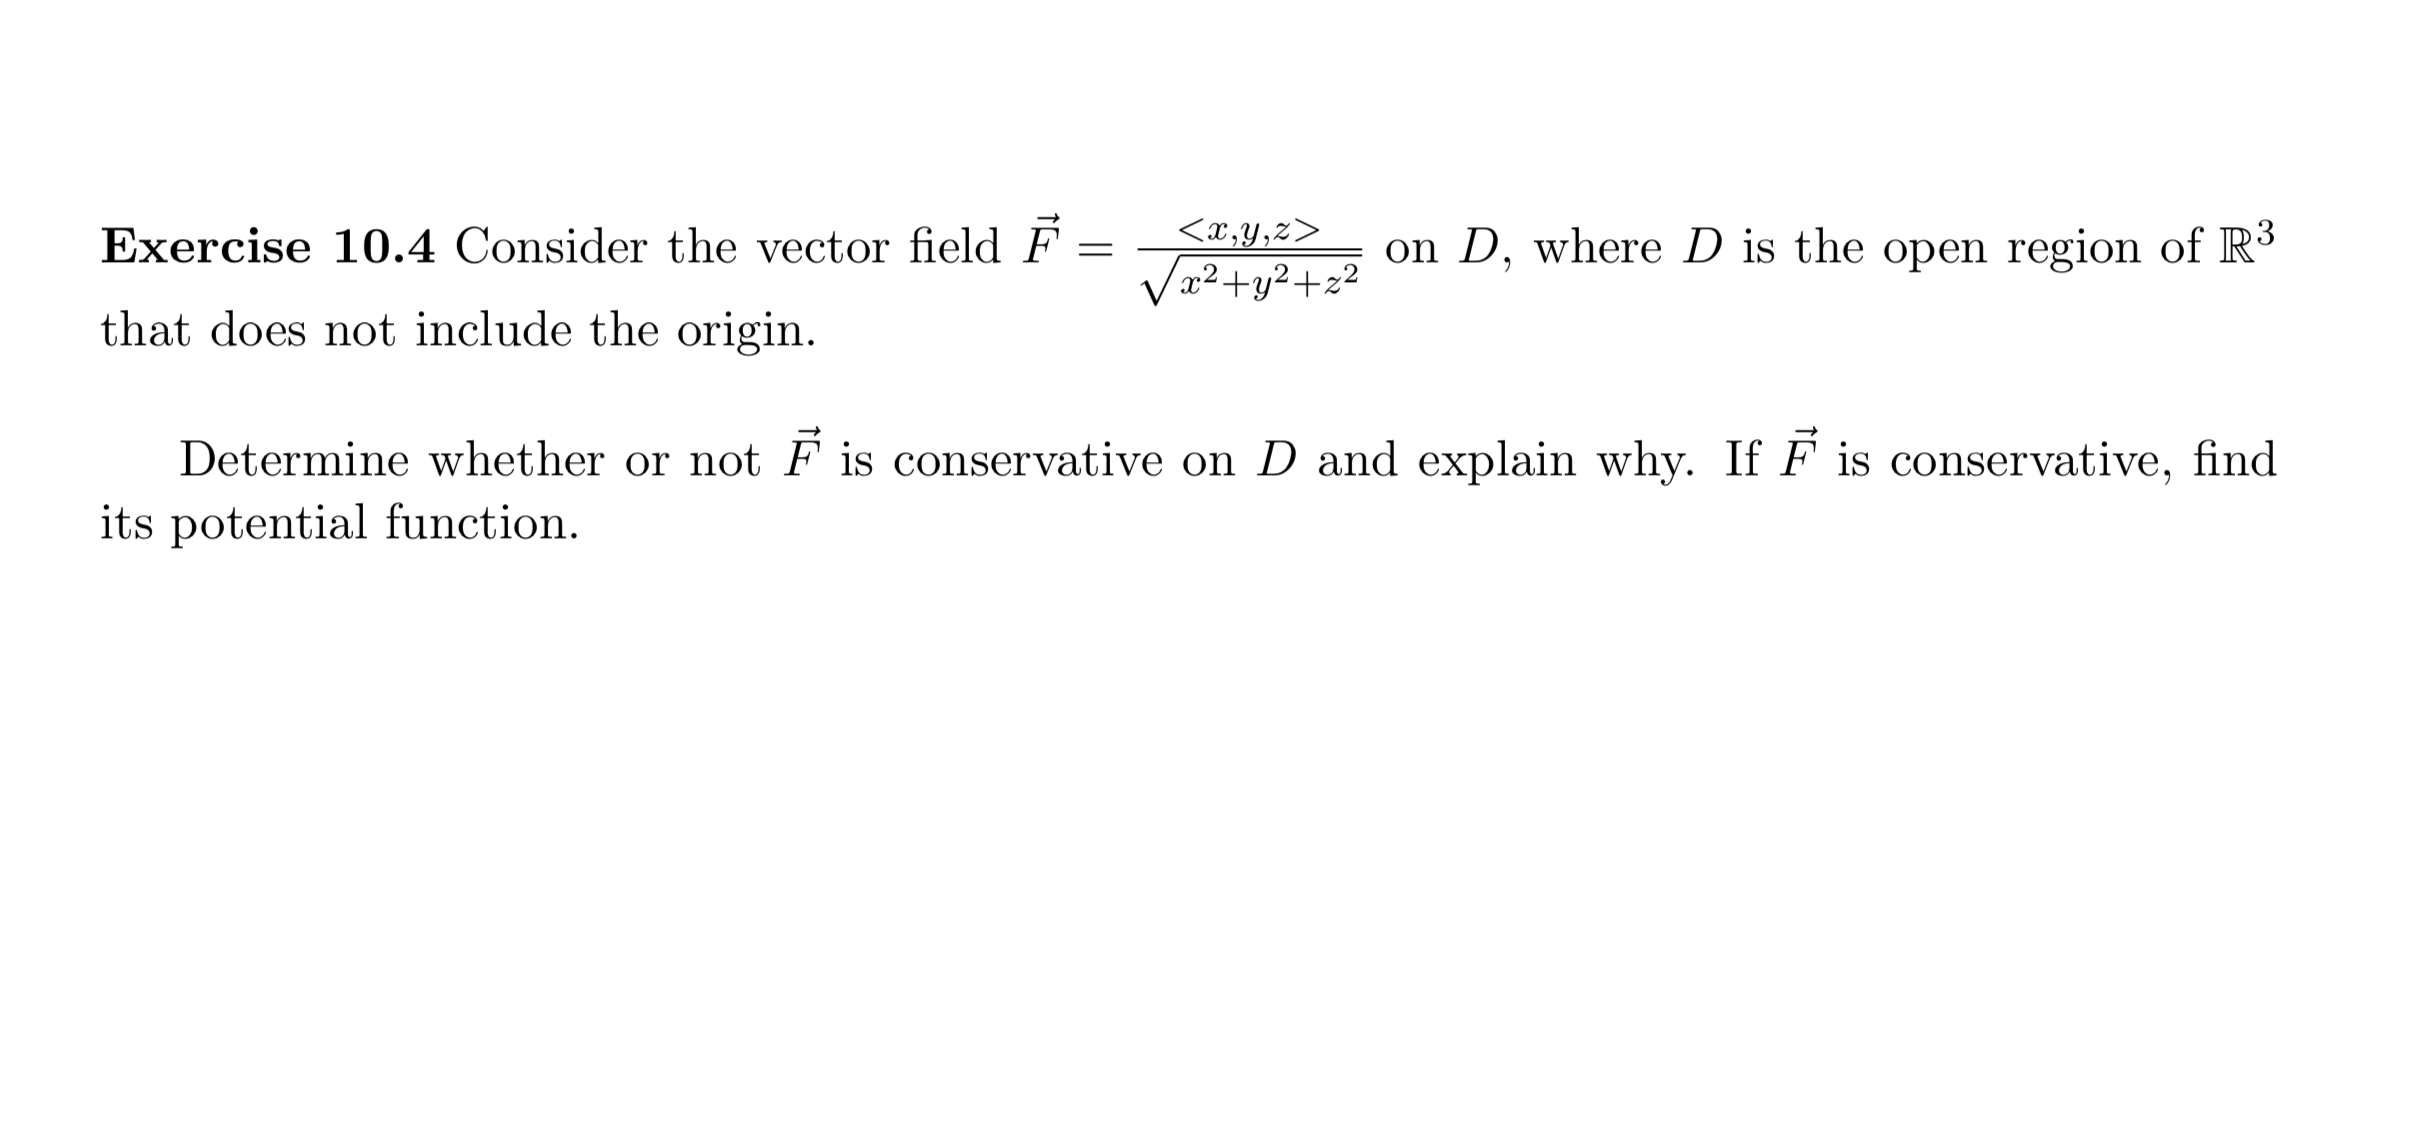 Exercise 10.4 Consider the vector field F
<x,y,z>
on D, where D is the open region of R3
Va²+y² +z²
that does not include the origin.
Determine whether or not F is conservative on D and explain why. If F is conservative, find
its potential function.
